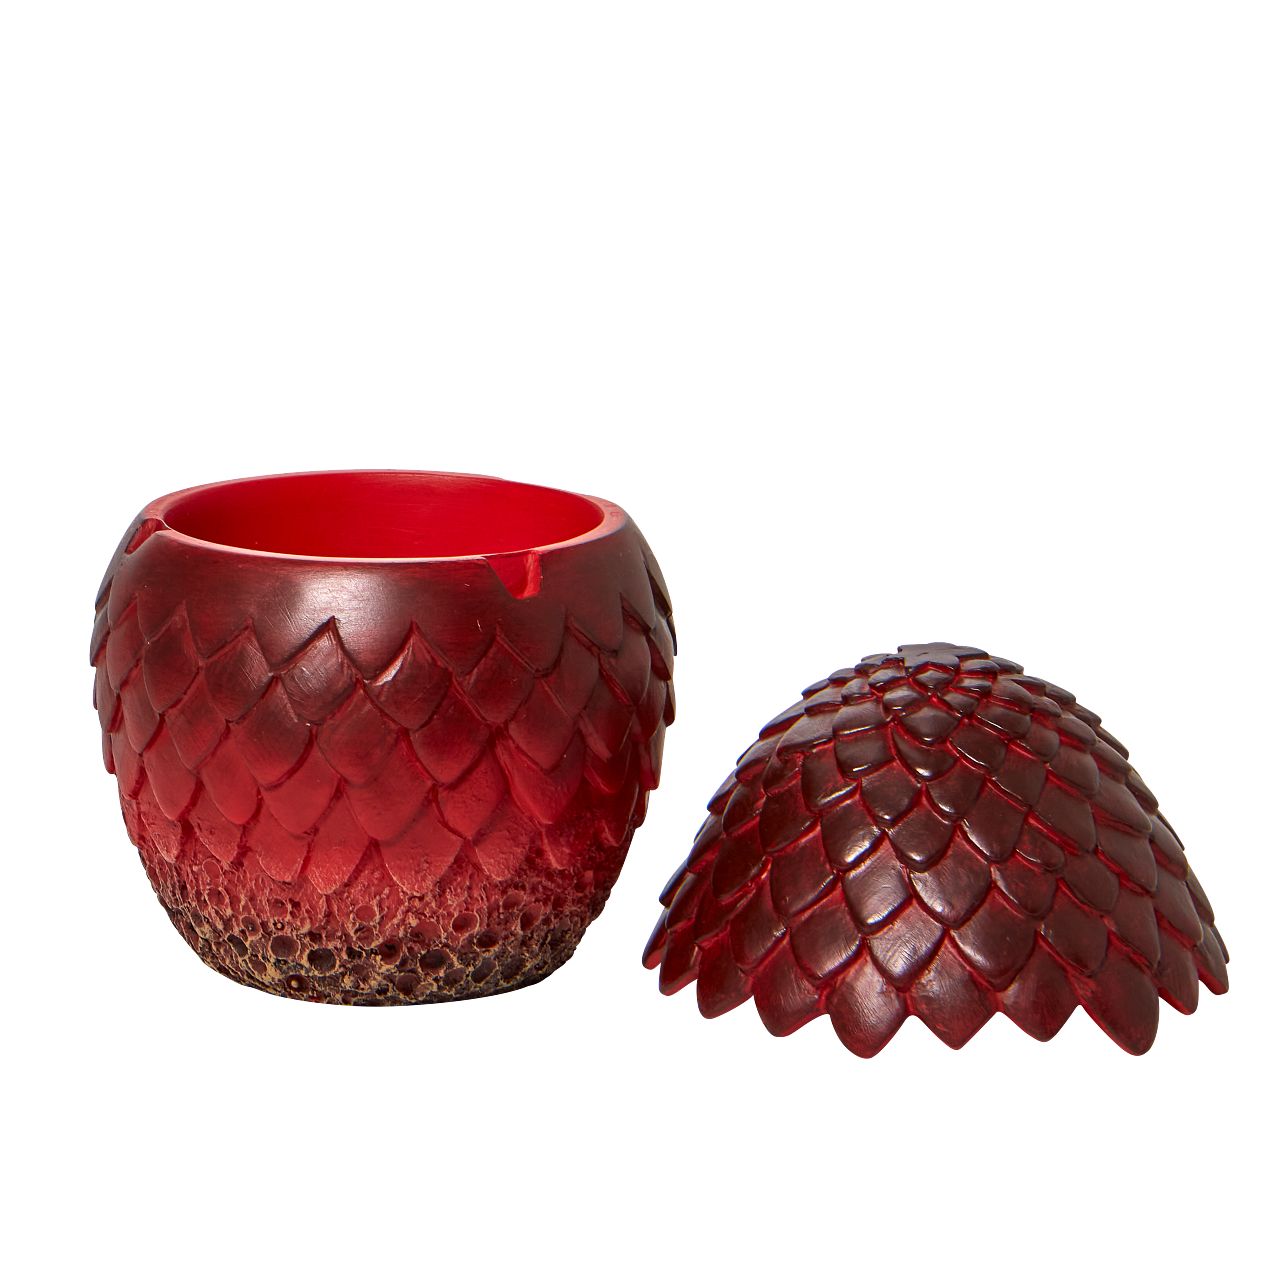 Department 56 Game of Thrones Dragon Egg Trinket Box  Drogon is the last known Dragon in existence and the personal mount of Daenerys. Known for his black and red scale he strikes a terrifying and imposing presence. But you can forget that he came from something so small as this egg.